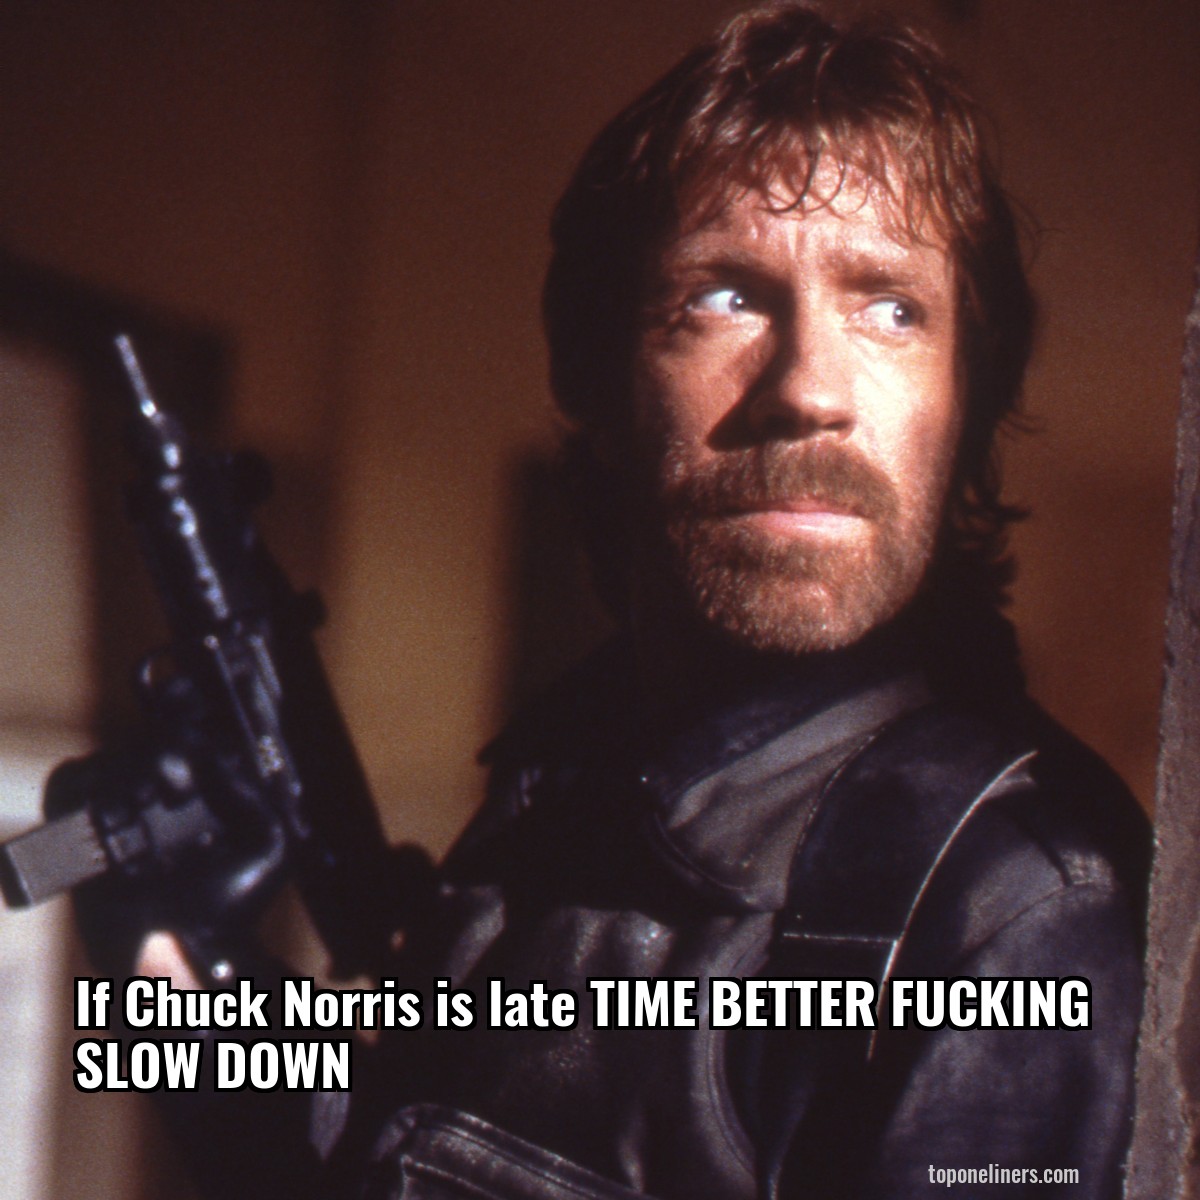 If Chuck Norris is late TIME BETTER FUCKING SLOW DOWN